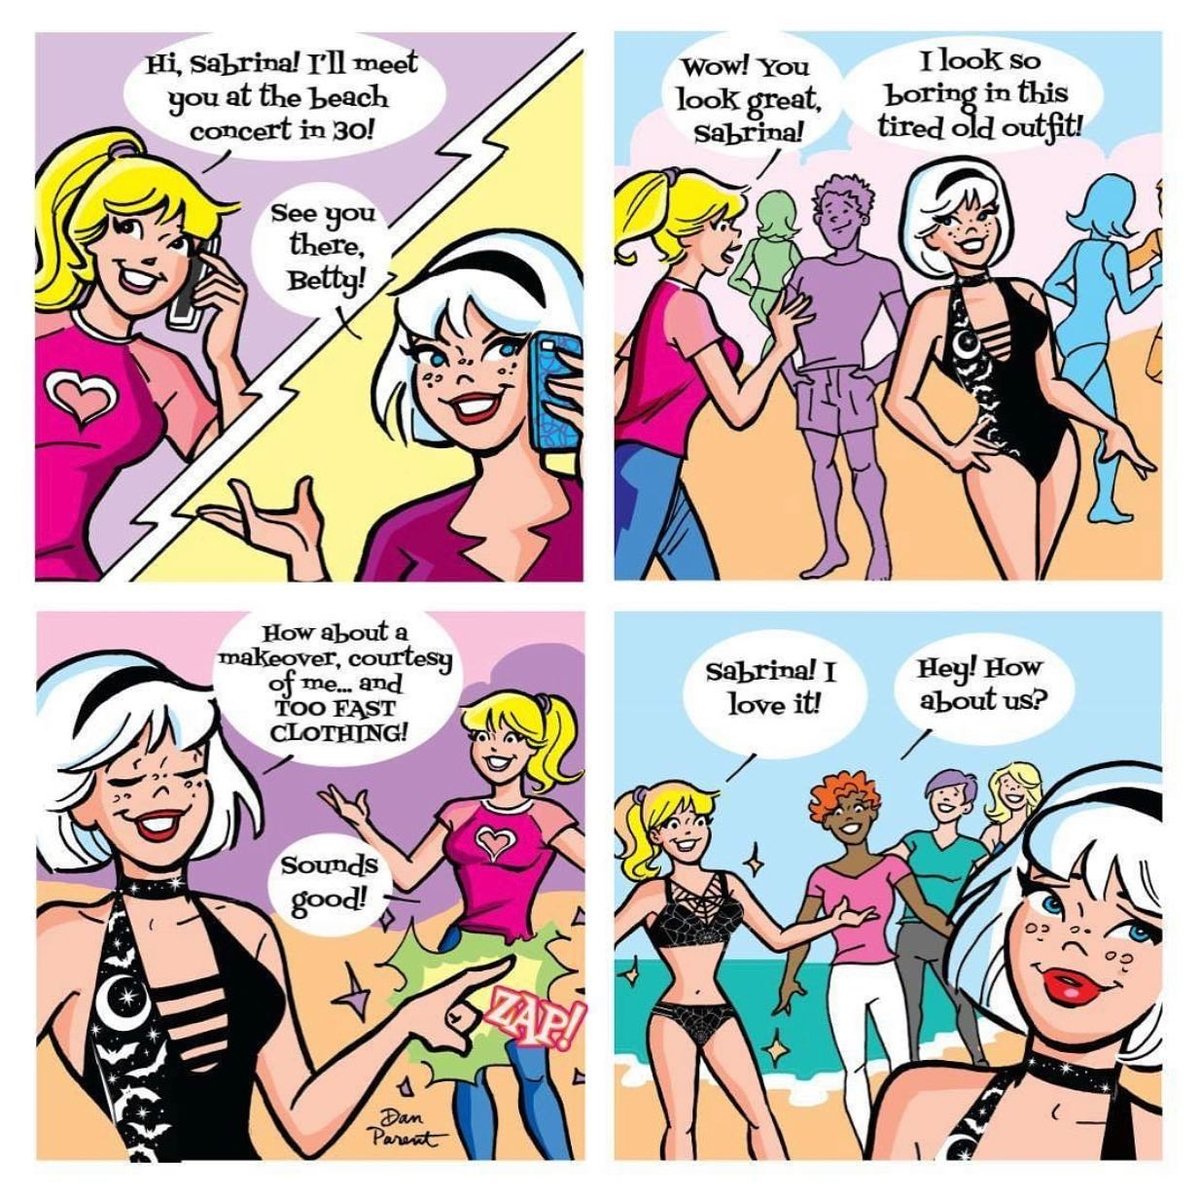 Betty and Sabrina just got goth makeovers! Check it out and shop the looks now at: ★ soo.nr/erGX ★ #archiecomics #riverdale #sabrina #bettycooper #danparent #archiecomics #riverdale #sabrina #bettycooper #danparent #swimwear #fashion #summer @parentdaniel